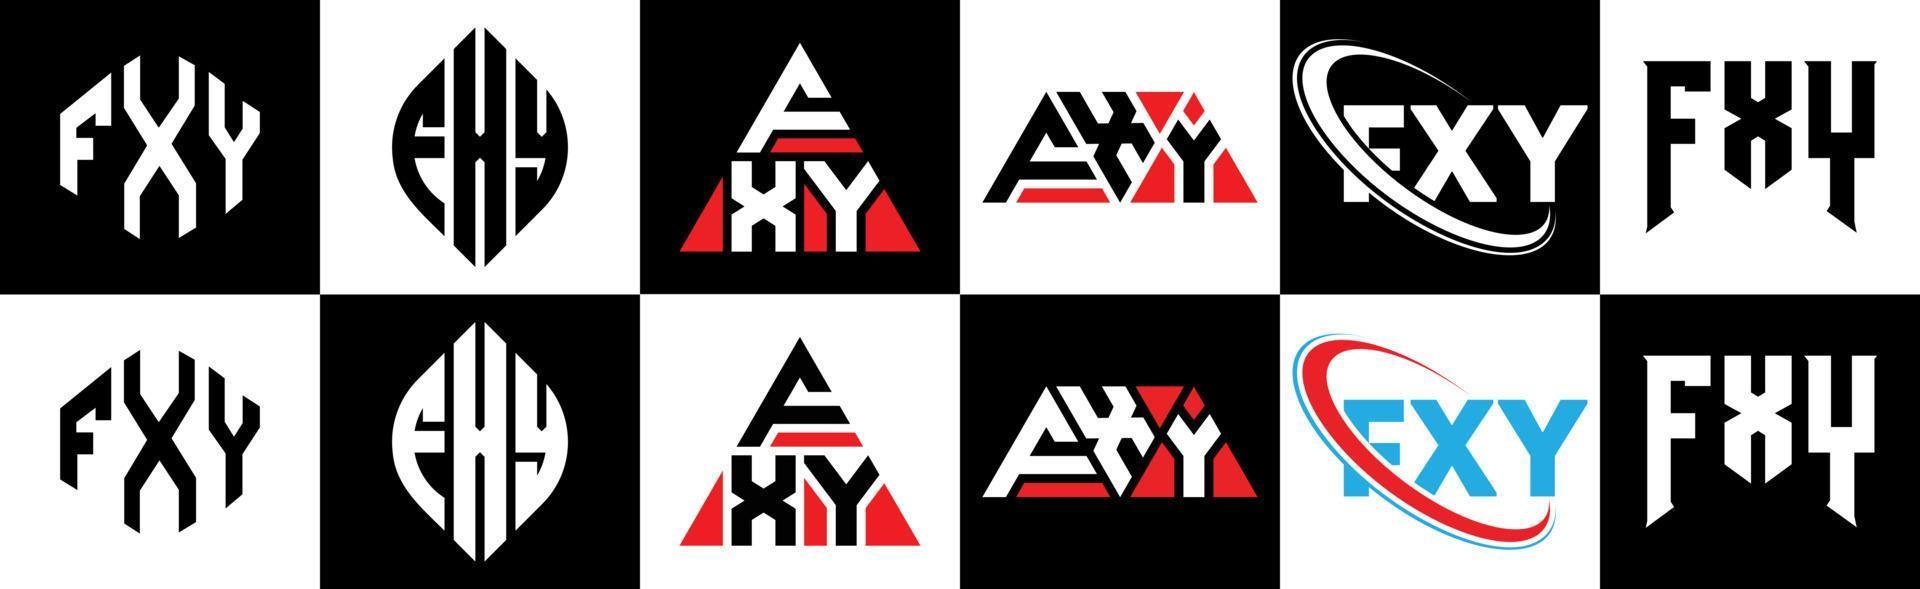 FXY letter logo design in six style. FXY polygon, circle, triangle, hexagon, flat and simple style with black and white color variation letter logo set in one artboard. FXY minimalist and classic logo vector